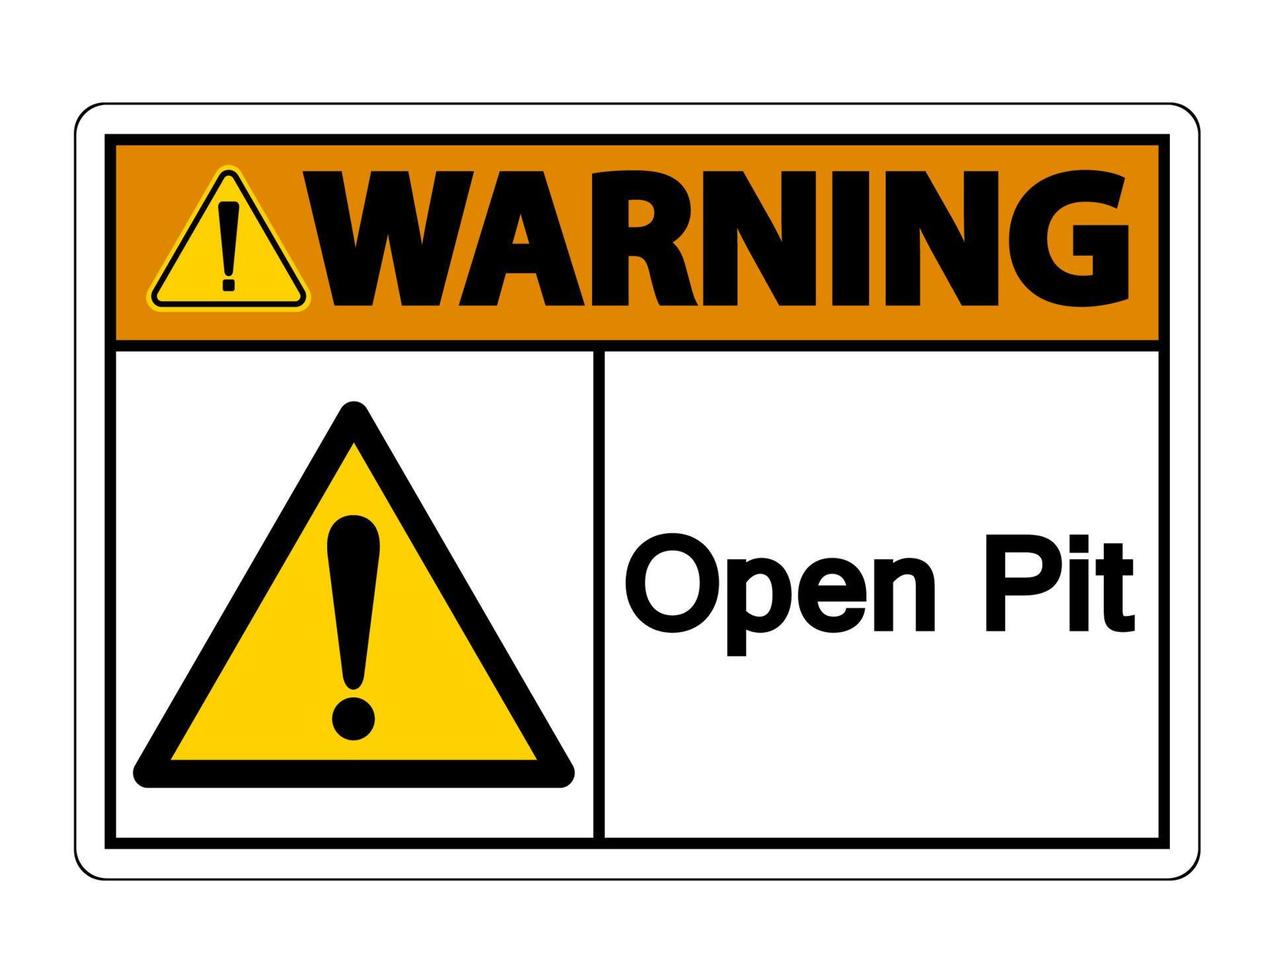 Warning Open Pit Symbol Sign on white background vector